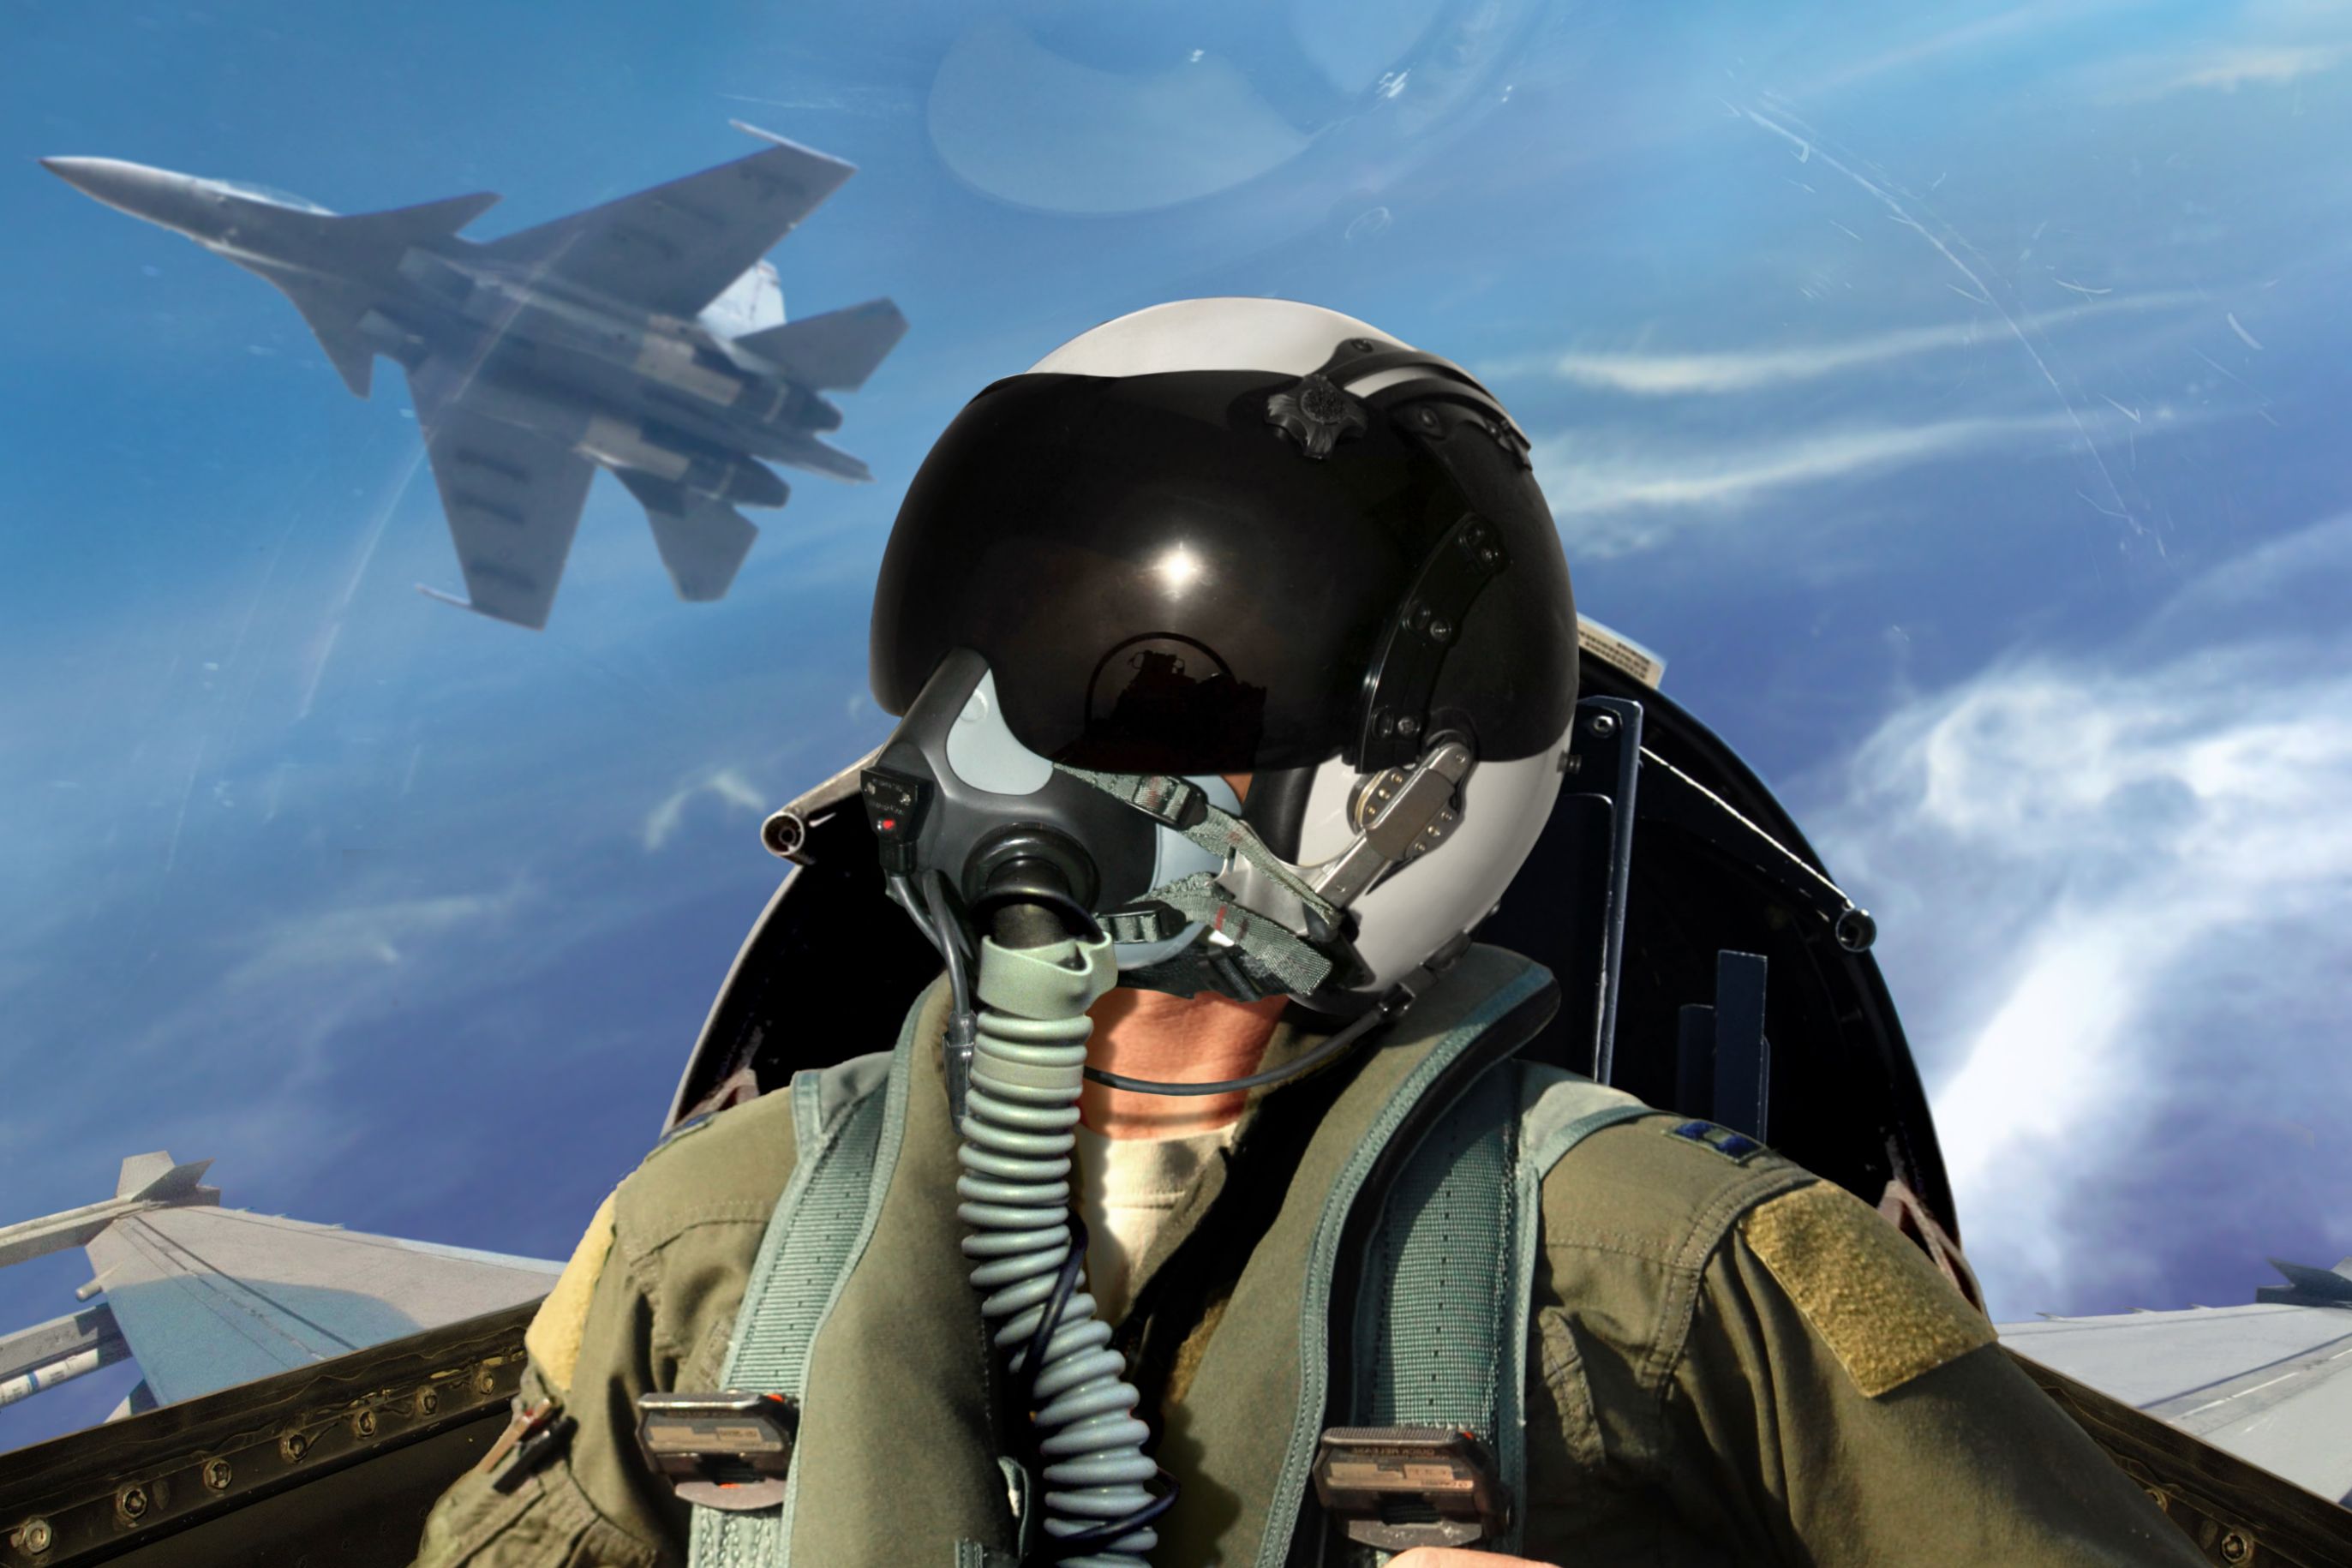 A Fighter pilot wearing a mask, with another fighter jet flying just behind him.